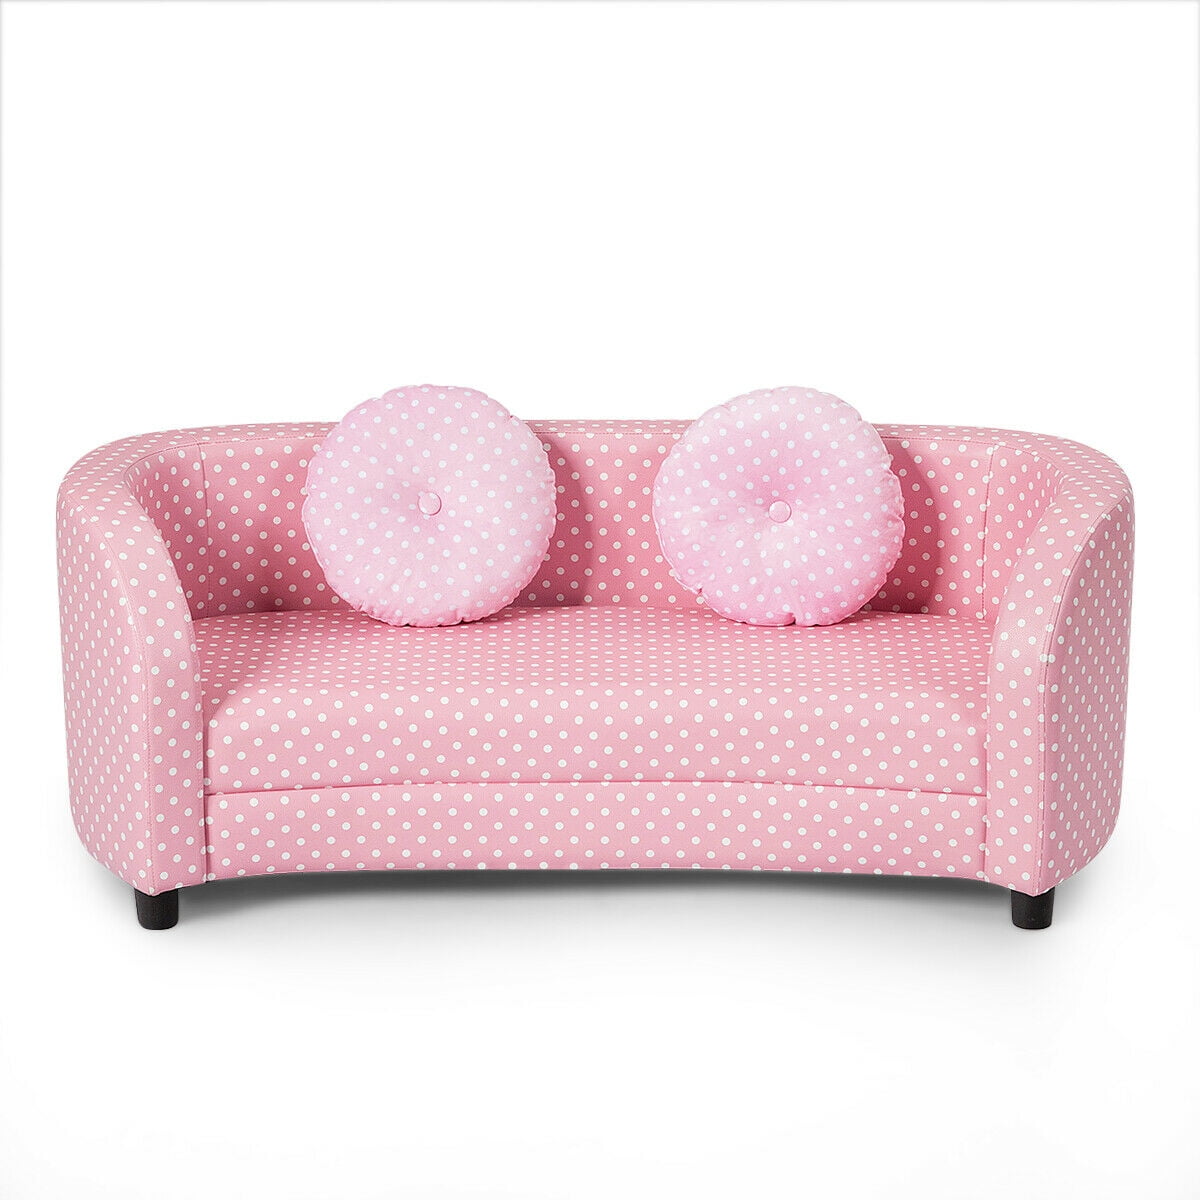 Details about   Pink Kids Sofa Chaise Lounge Armrest Chair Relax Couch Bedroom Living Room 